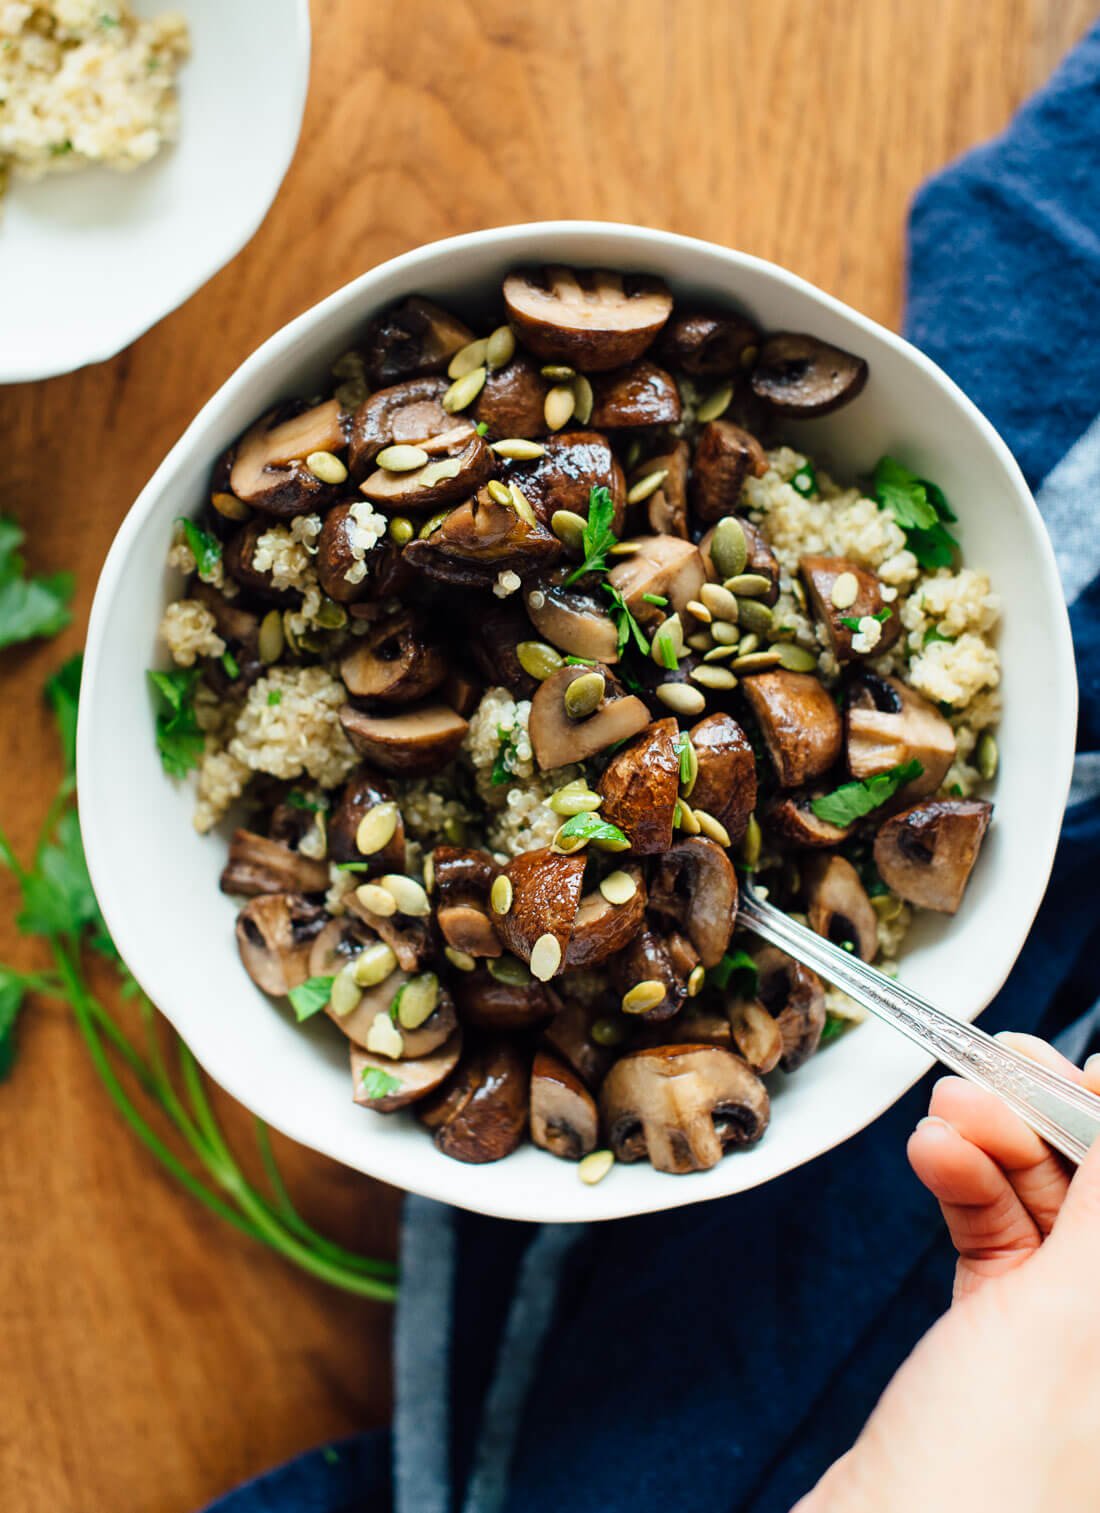 Healthy side dish or light dinner recipe—grilled mushrooms on herbed quinoa!